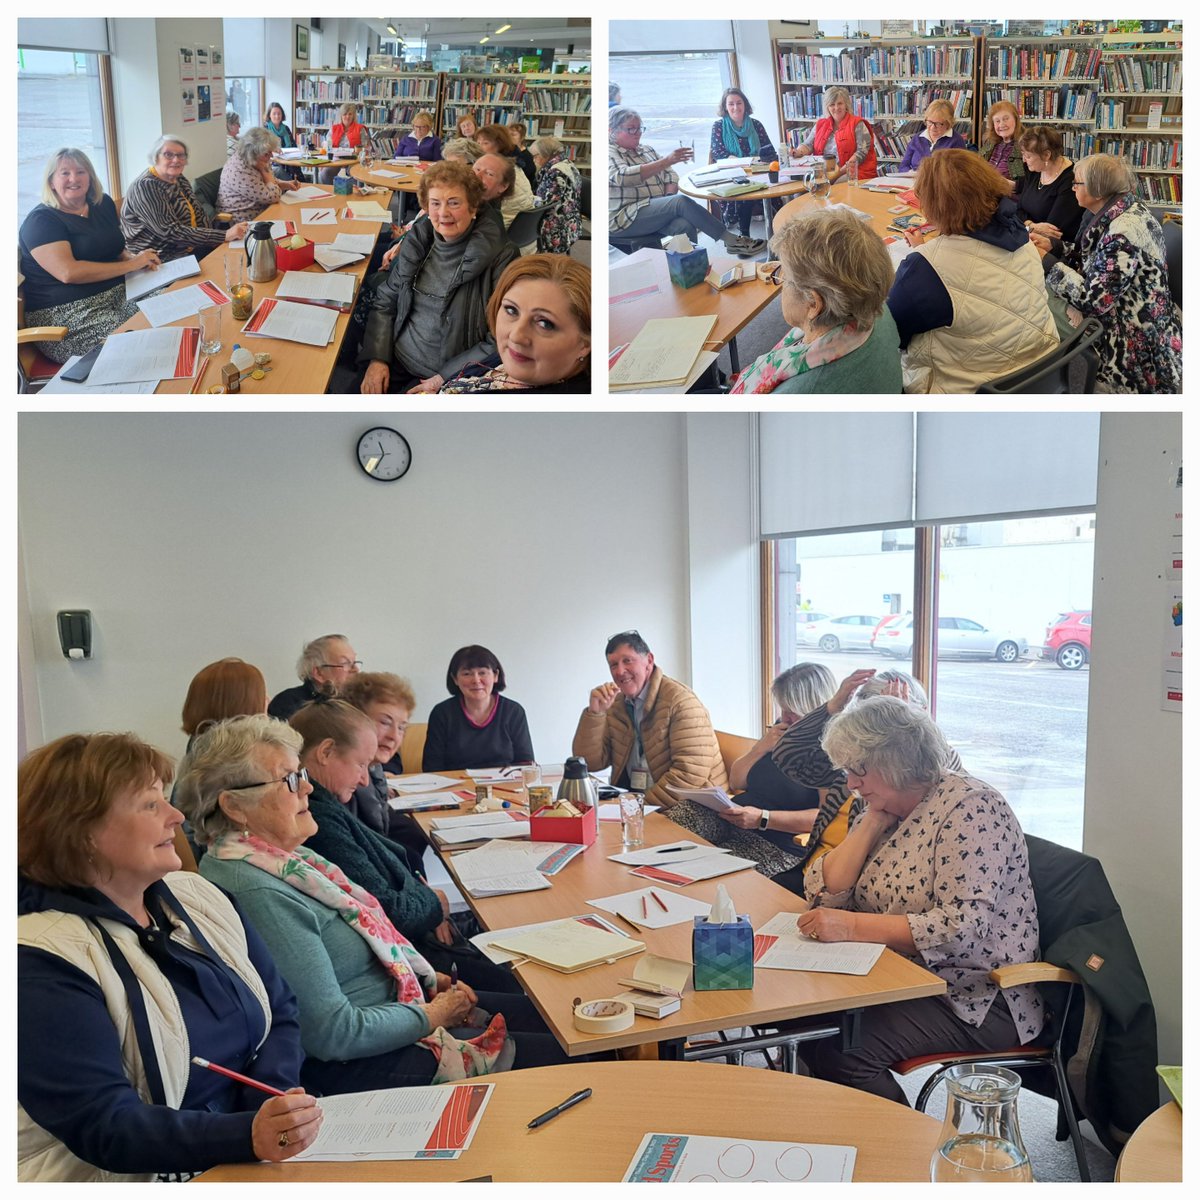 A great crowd in attendance at #MitchelstownLibrary for a Poetry Writing Workshop with Jenny Cox and Eileen Acheson from Write Minds, Poetry & Wellness. #poetrydayIRL #writeminds